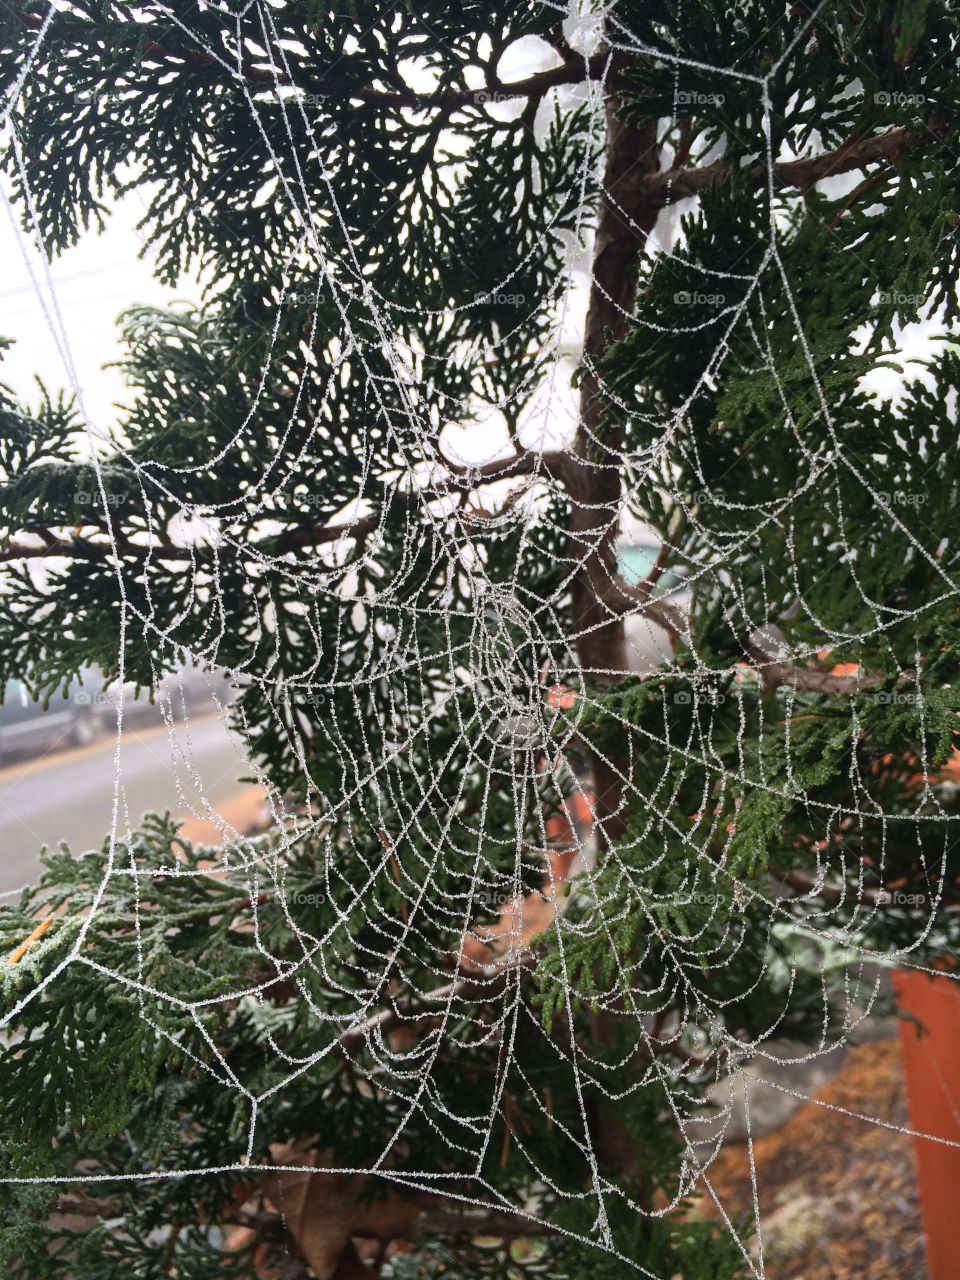 Icy spider web